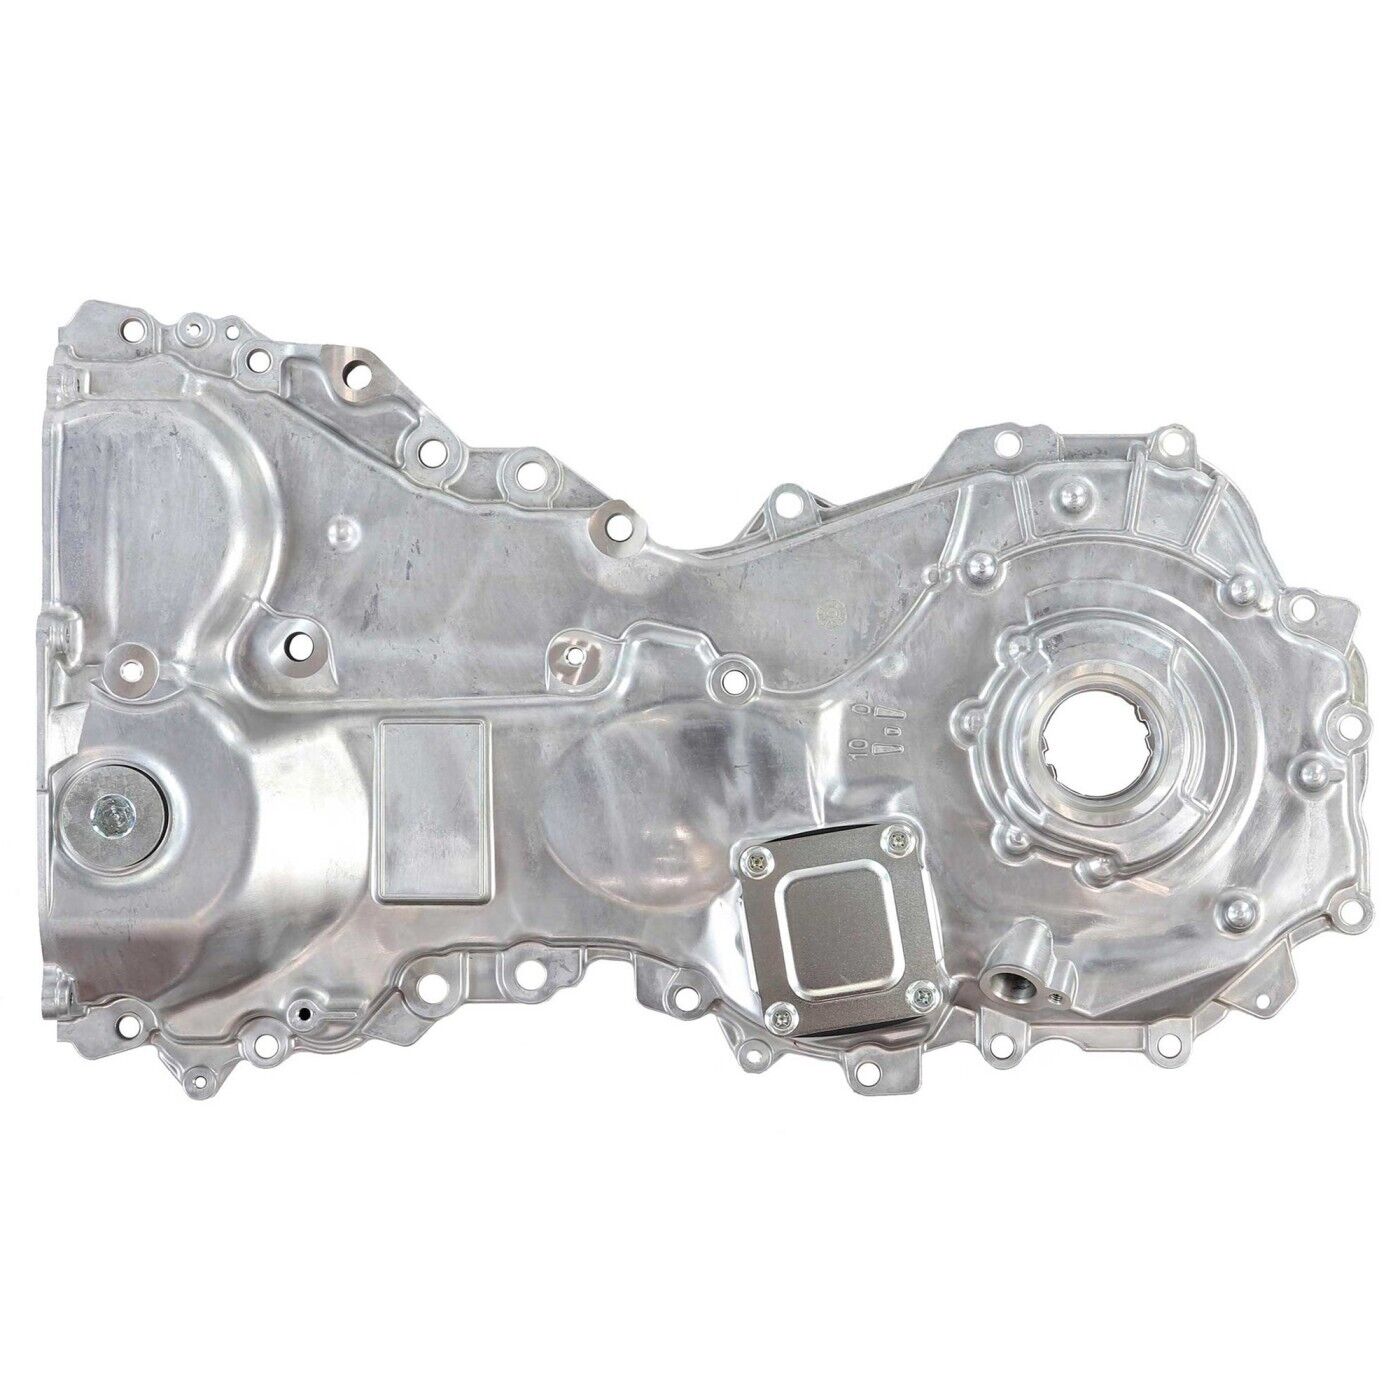 DNJ OP955 Oil Pump for Toyota Camry 2010-2011